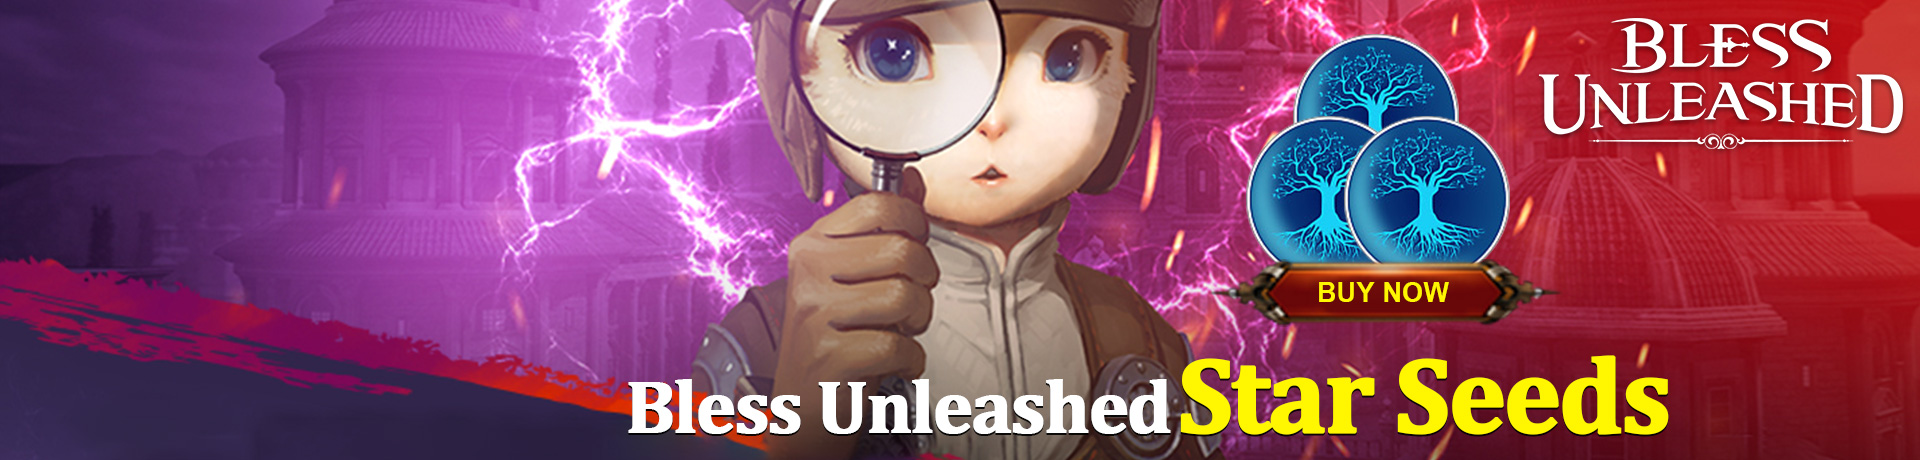 Buy Bless Unleashed Star Seeds